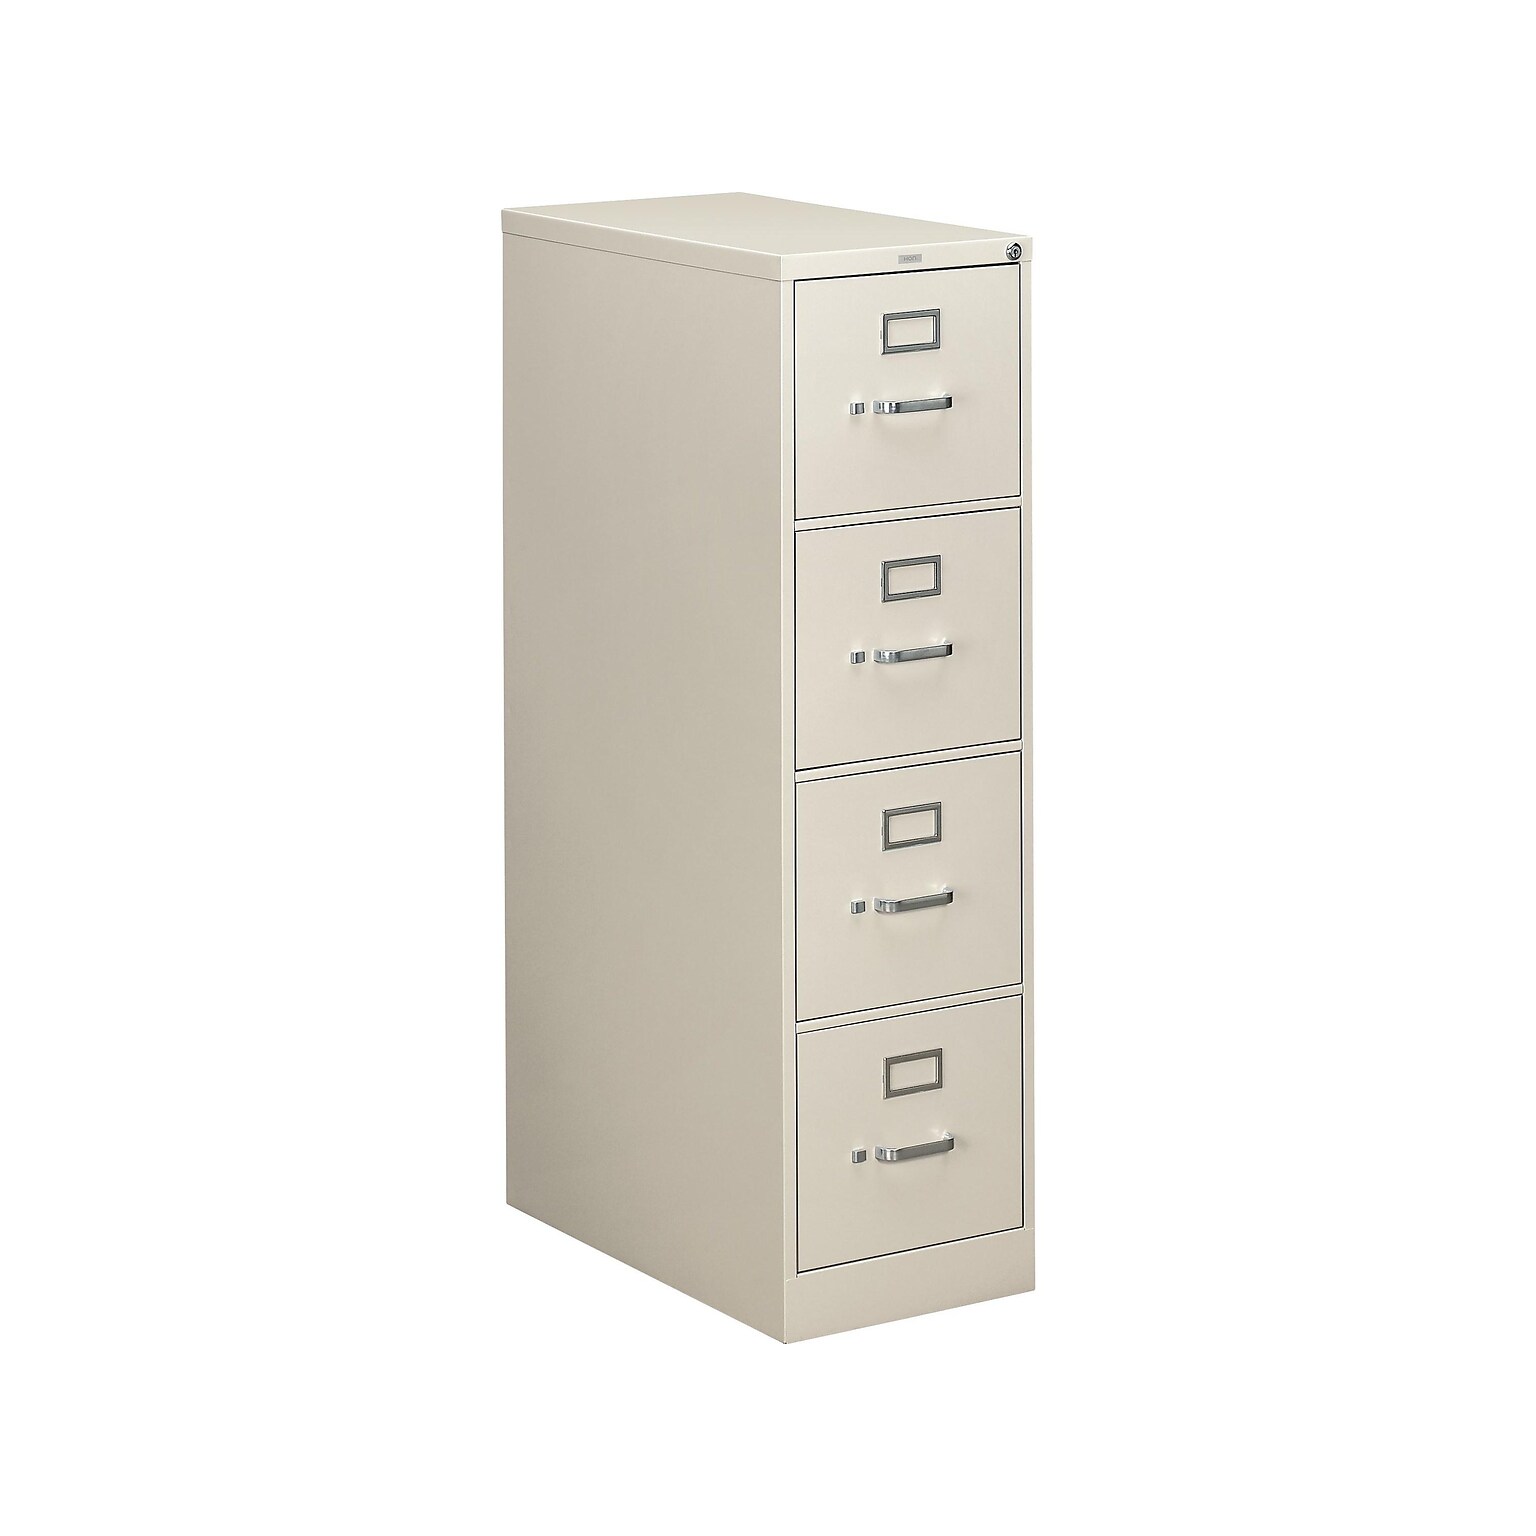 HON 310 Series 4-Drawer Vertical File Cabinet, Letter Size, Lockable, 52H x 15W x 26.5D, Light Gray (HON314PQ)